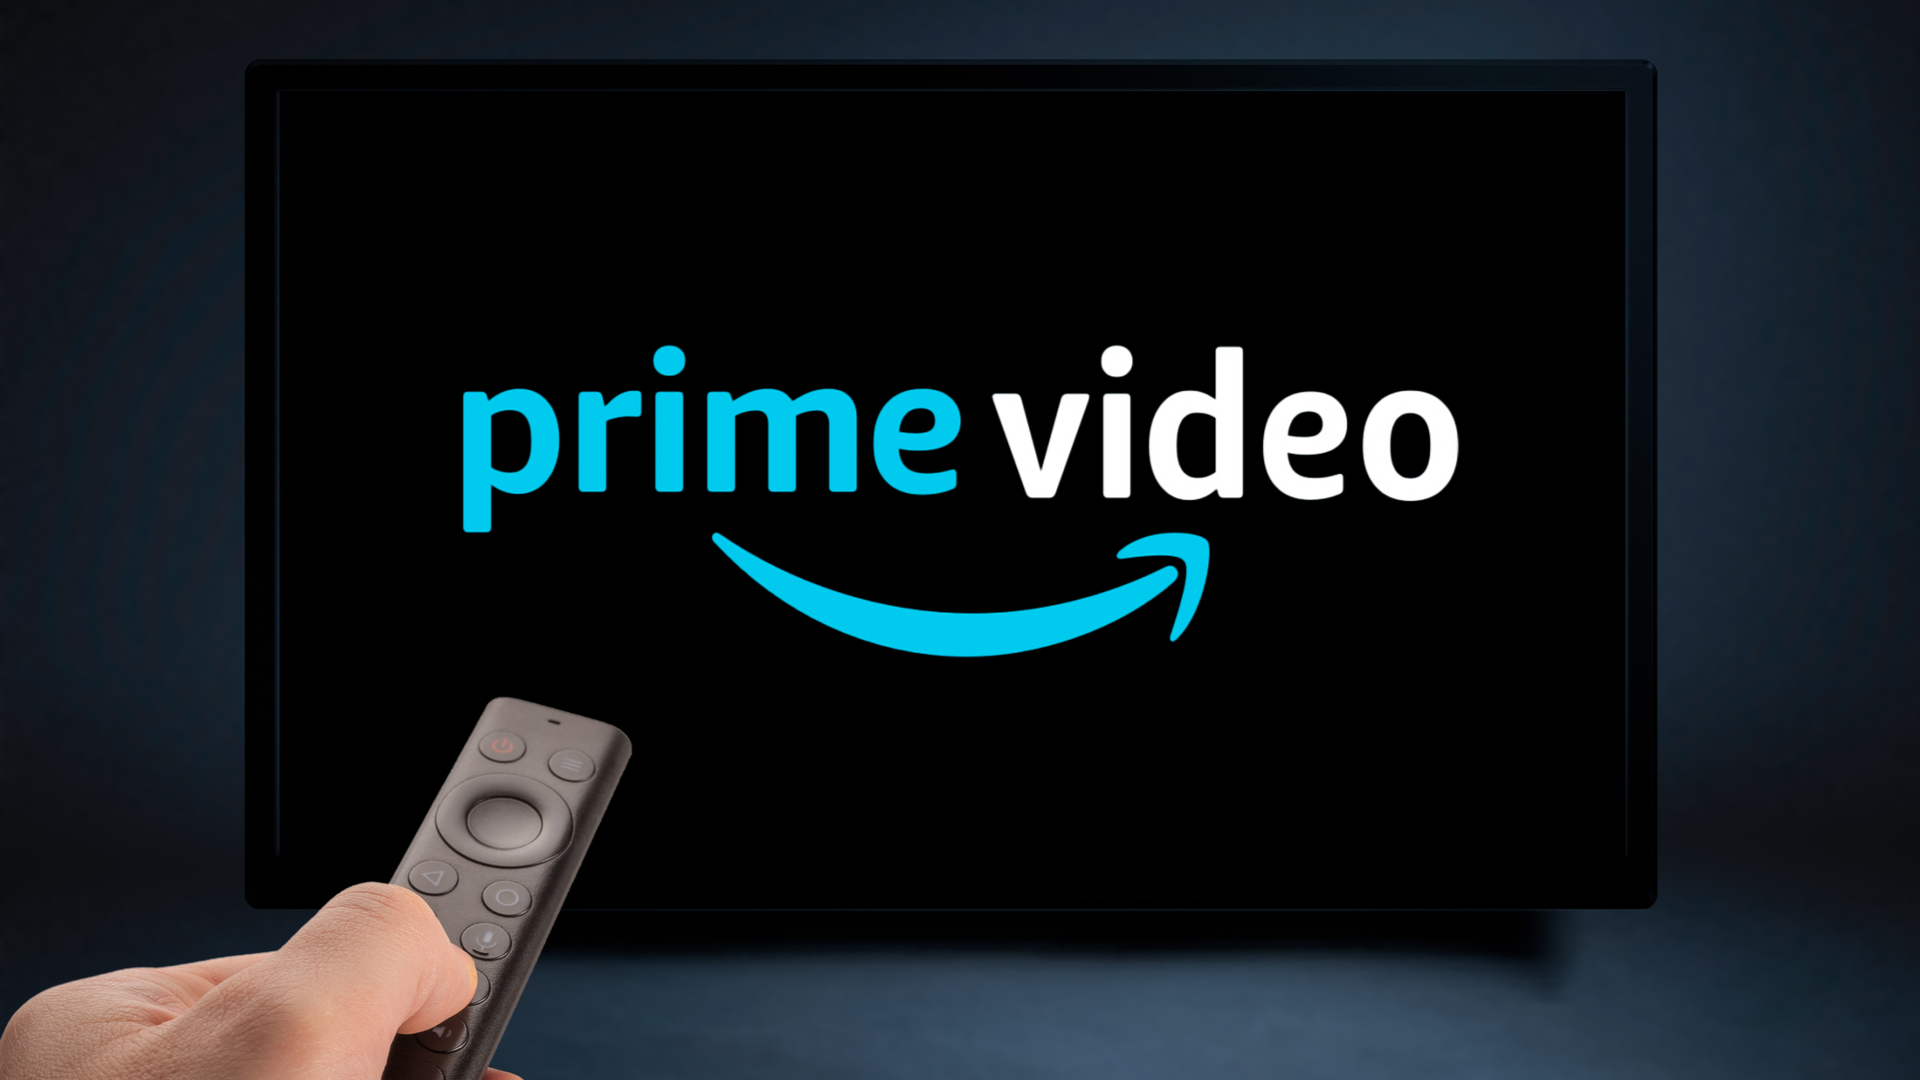 Reminder Amazon Prime Video is about to start inserting ads unless you